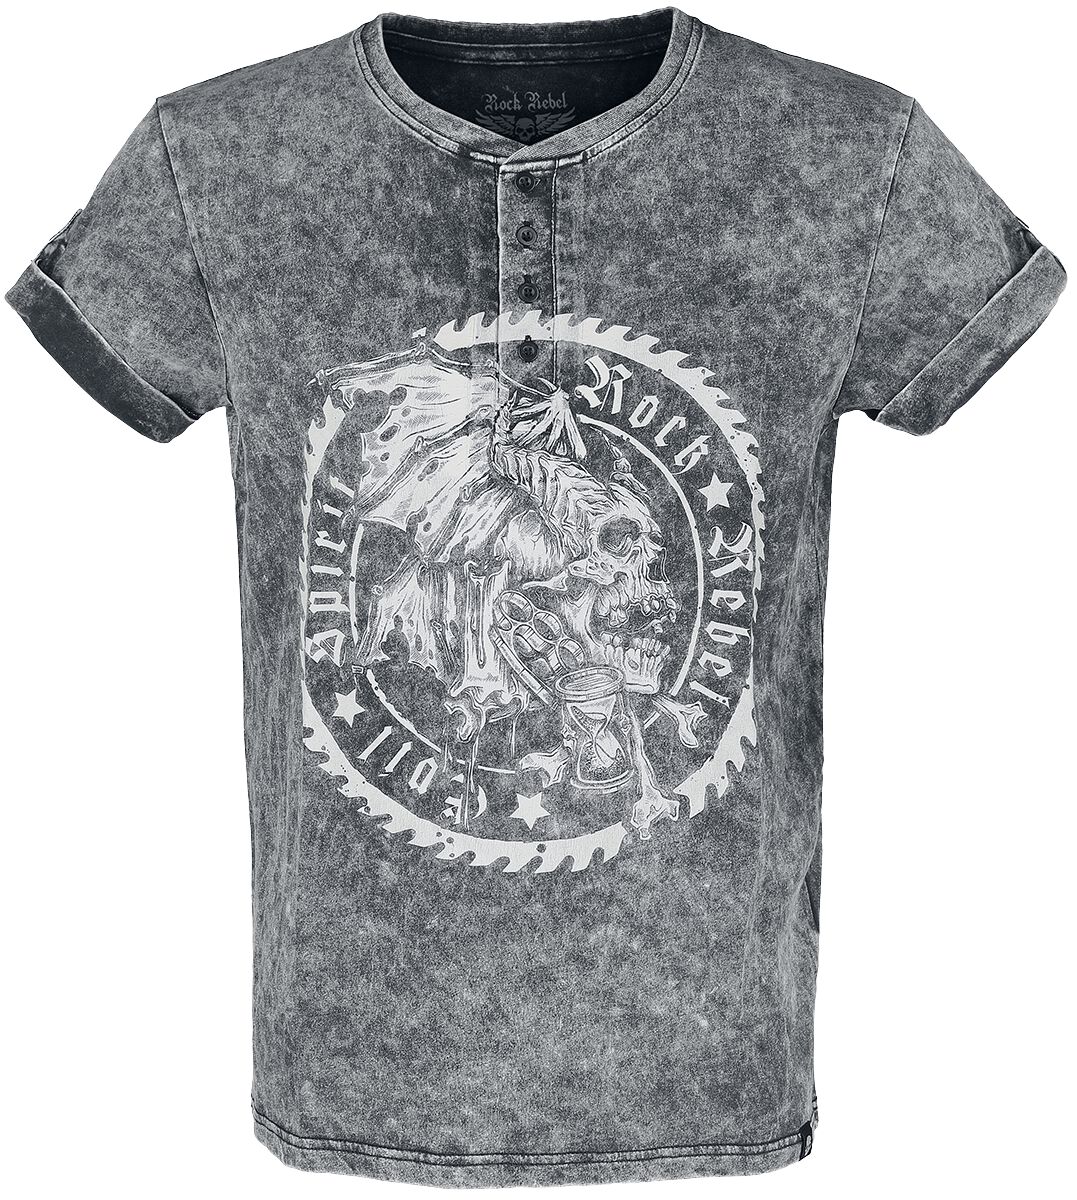 Image of T-Shirt di Rock Rebel by EMP - Vintage-Look T-Shirt with Button Placket - S a 5XL - Uomo - nero